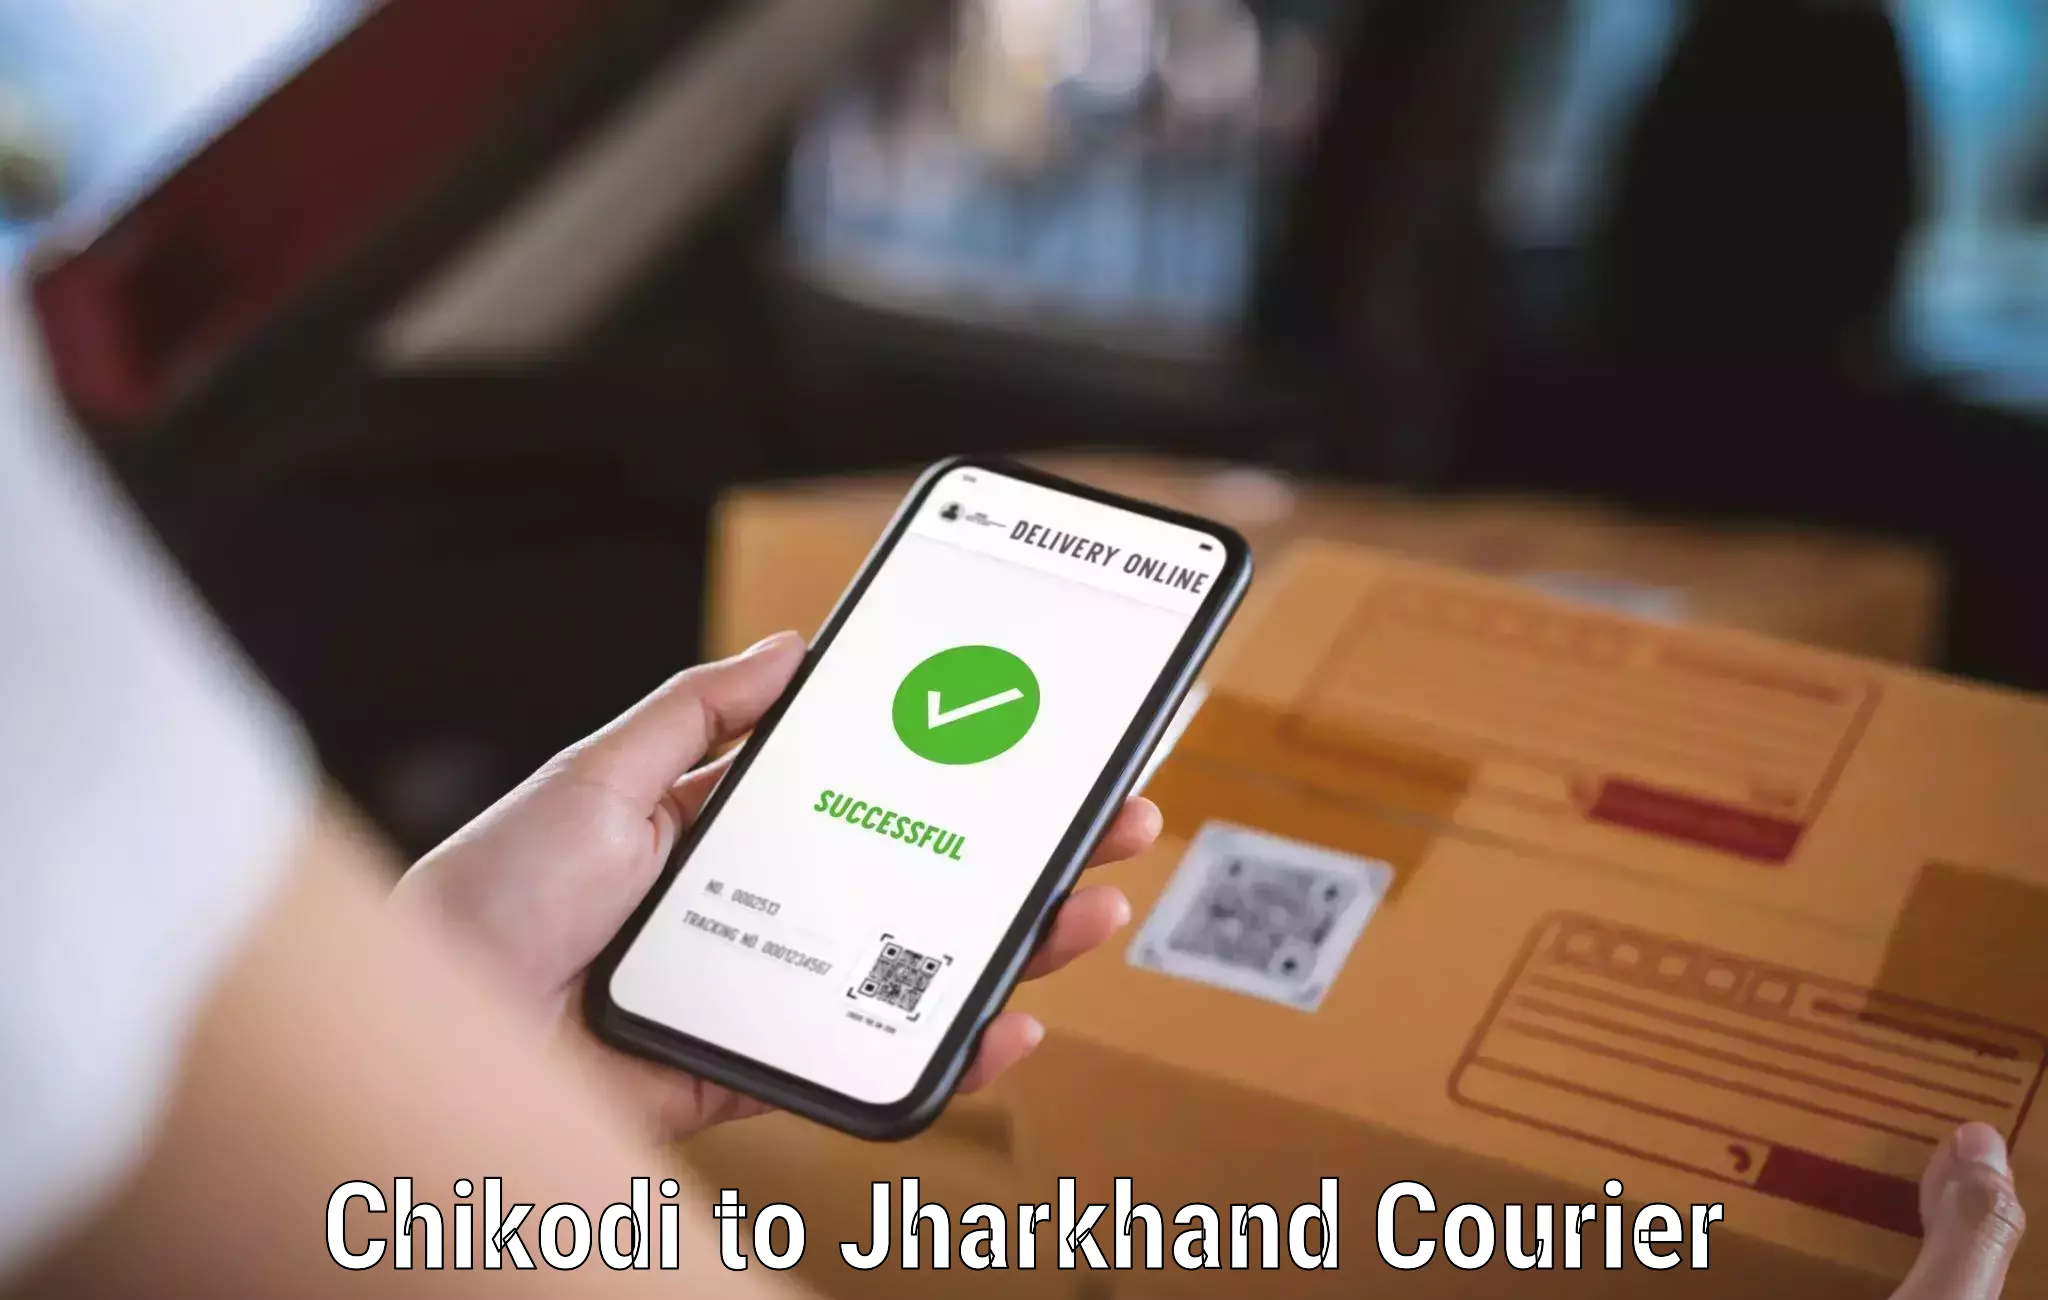 Business delivery service Chikodi to Jharkhand